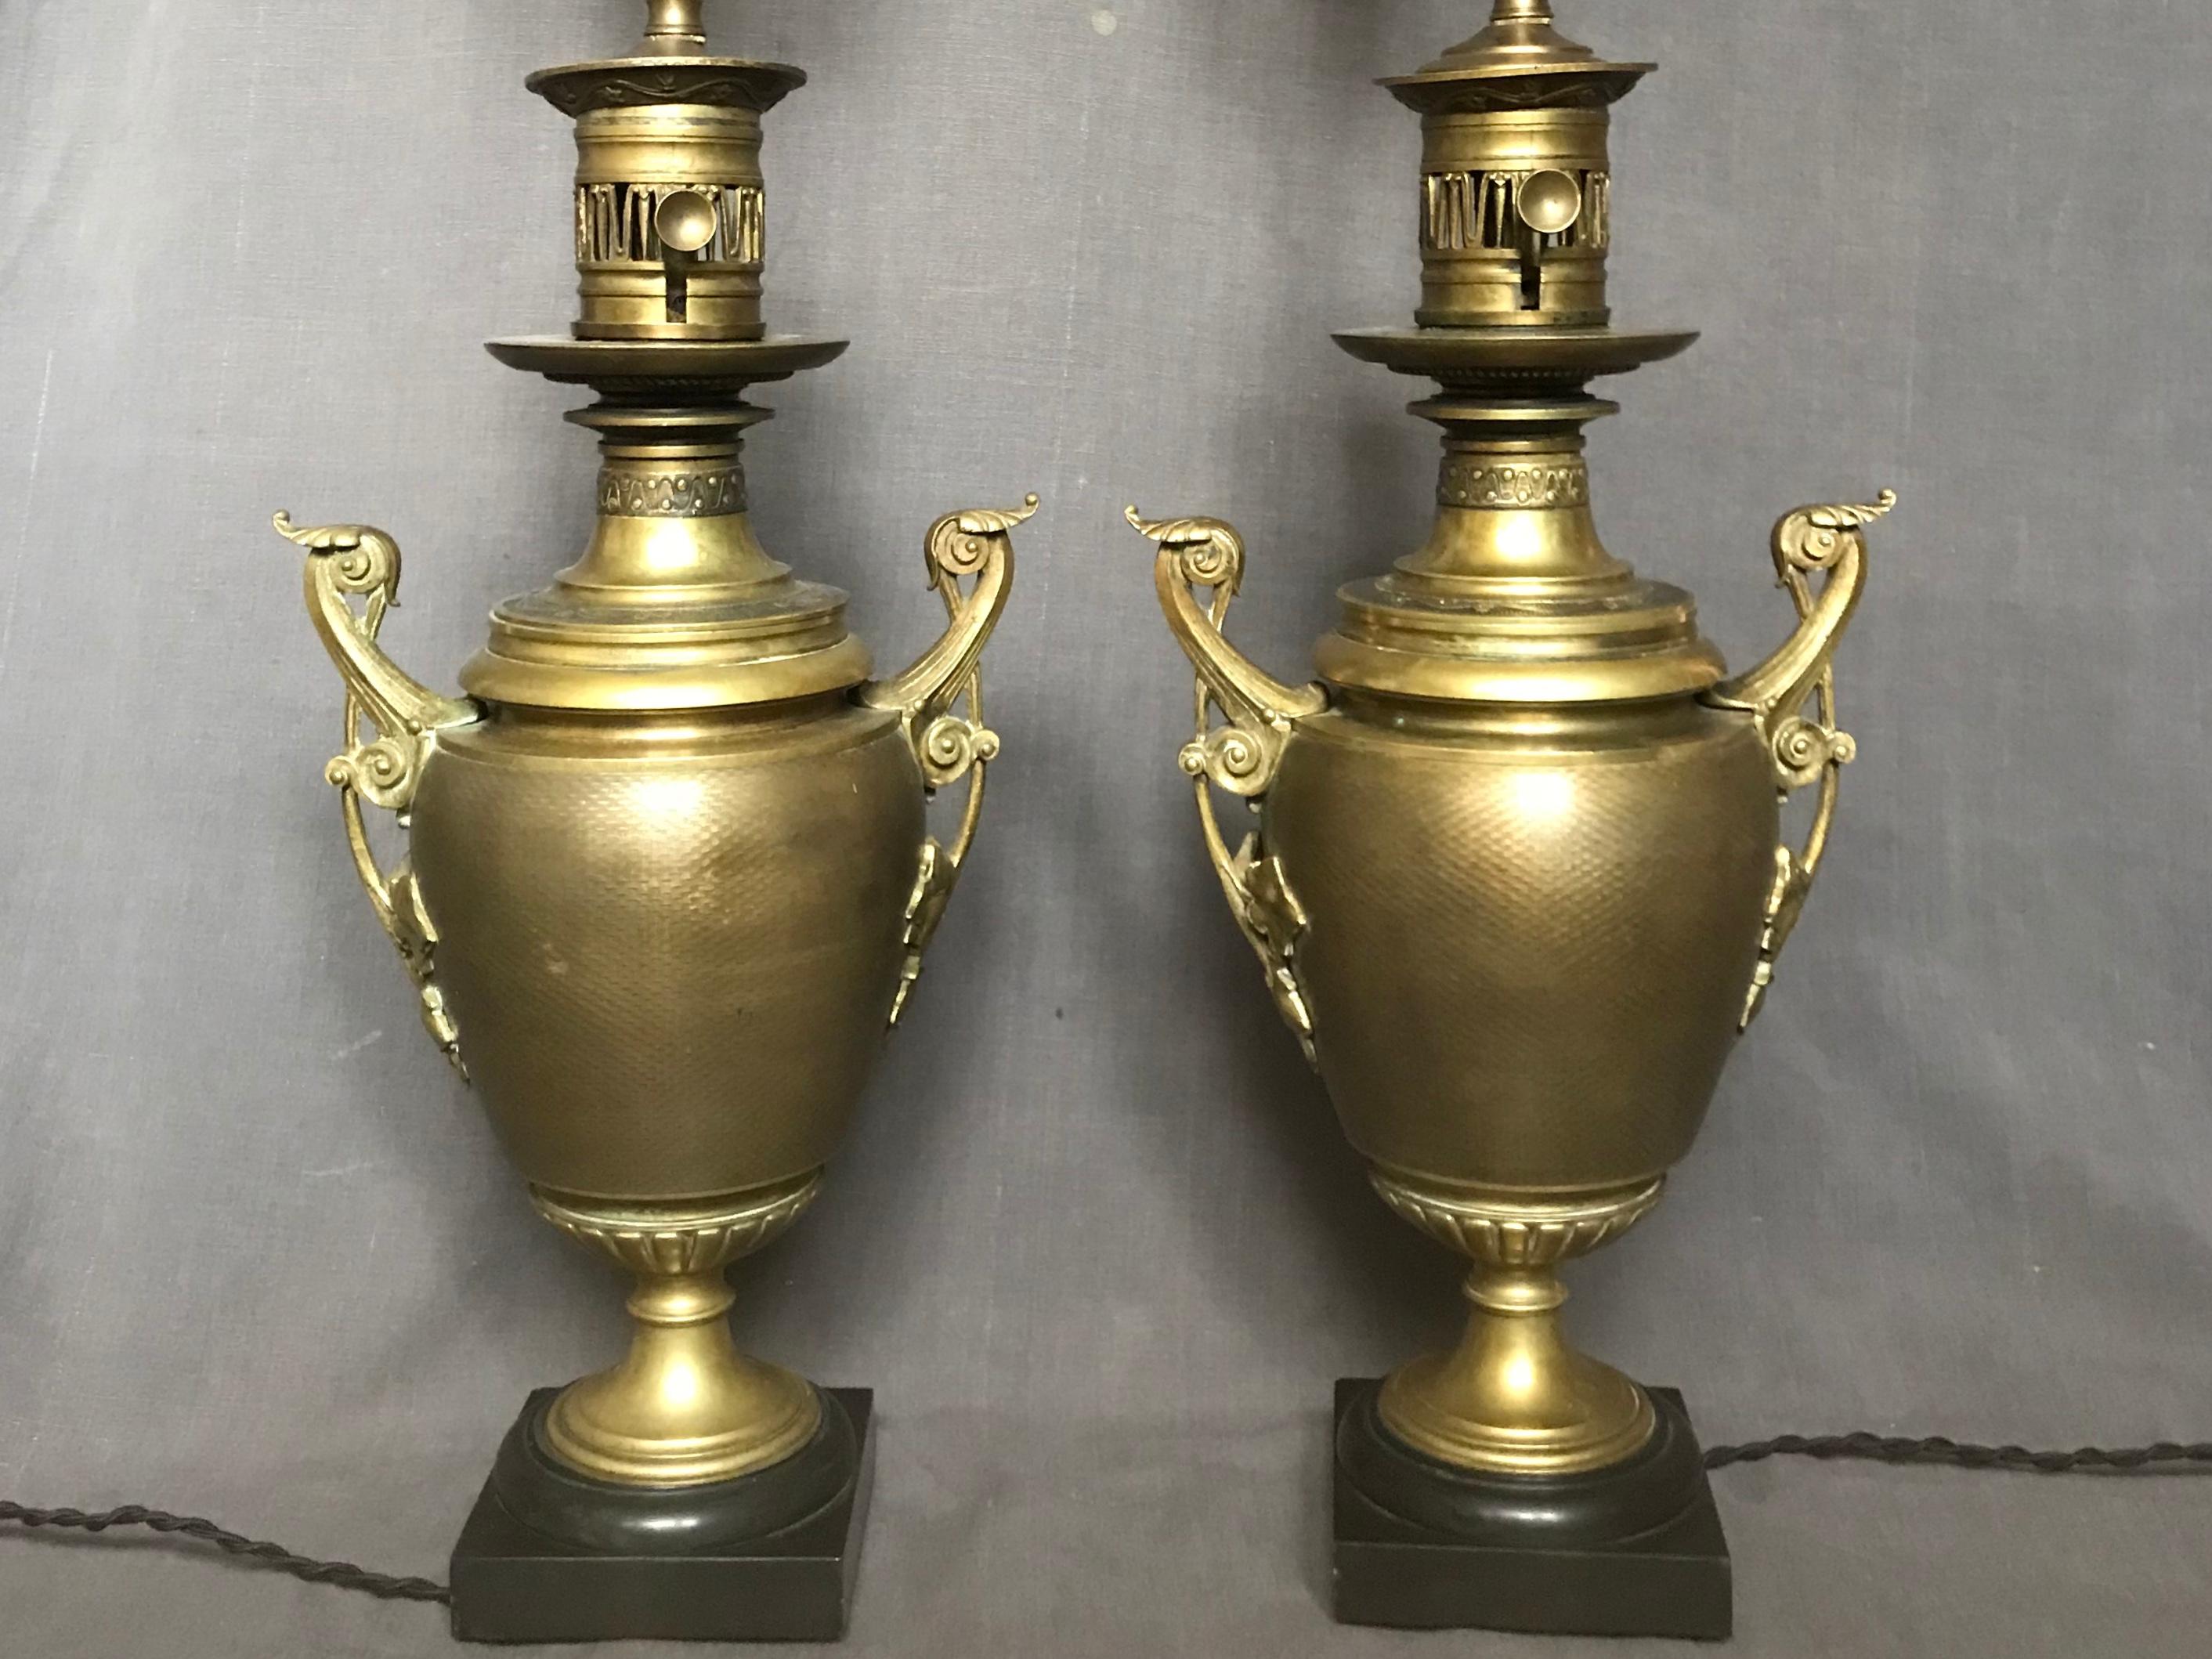 Pair of Napoleon III lamps. Pair of engine turned period brass lamps previously converted from oil to electric on black bases; newly rewired with black silk cords. France, late 19th century.
Dimensions: 9